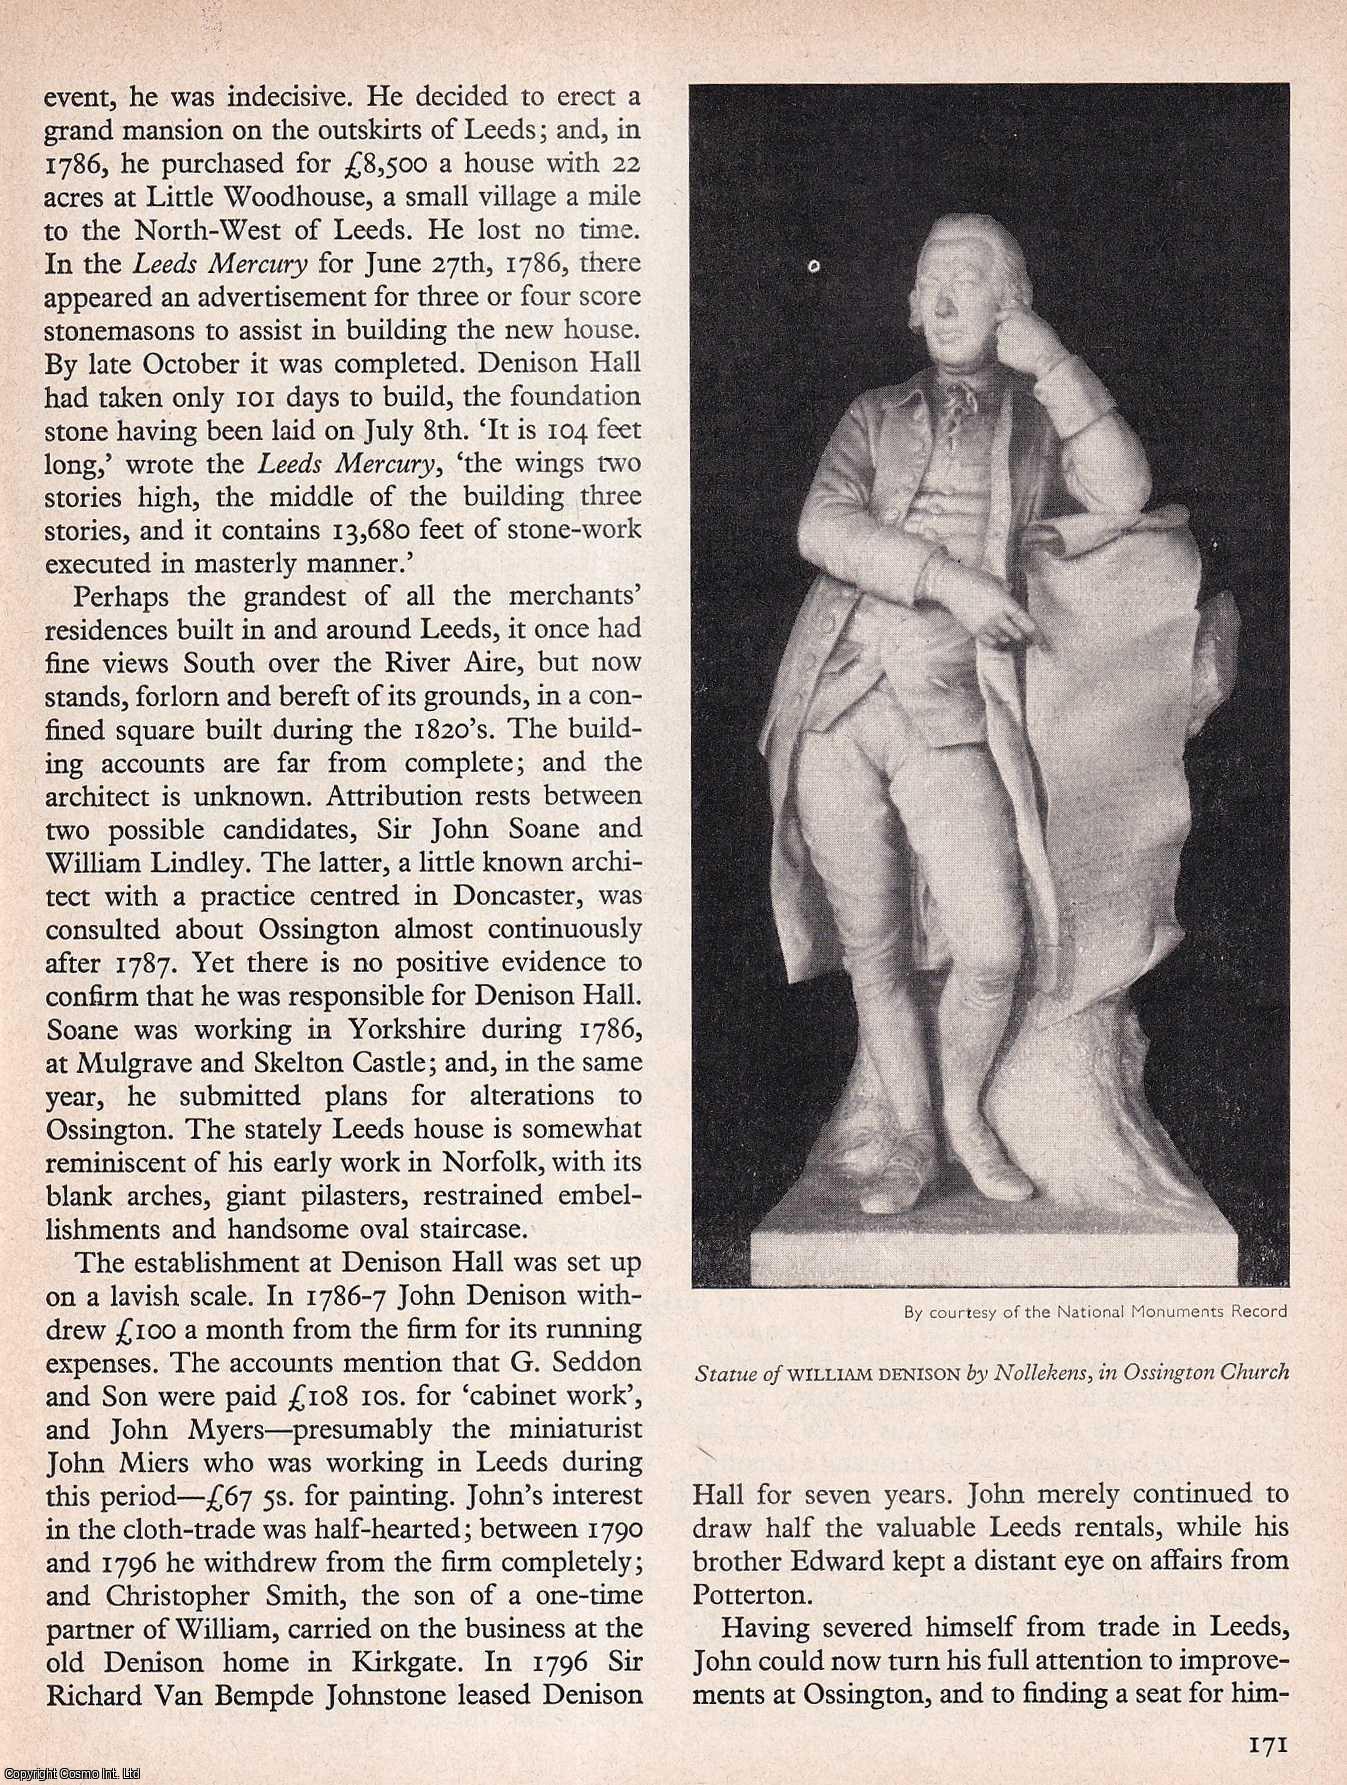 Richard Wilson - Ossington and The Denisons. An original article from History Today magazine, 1968.